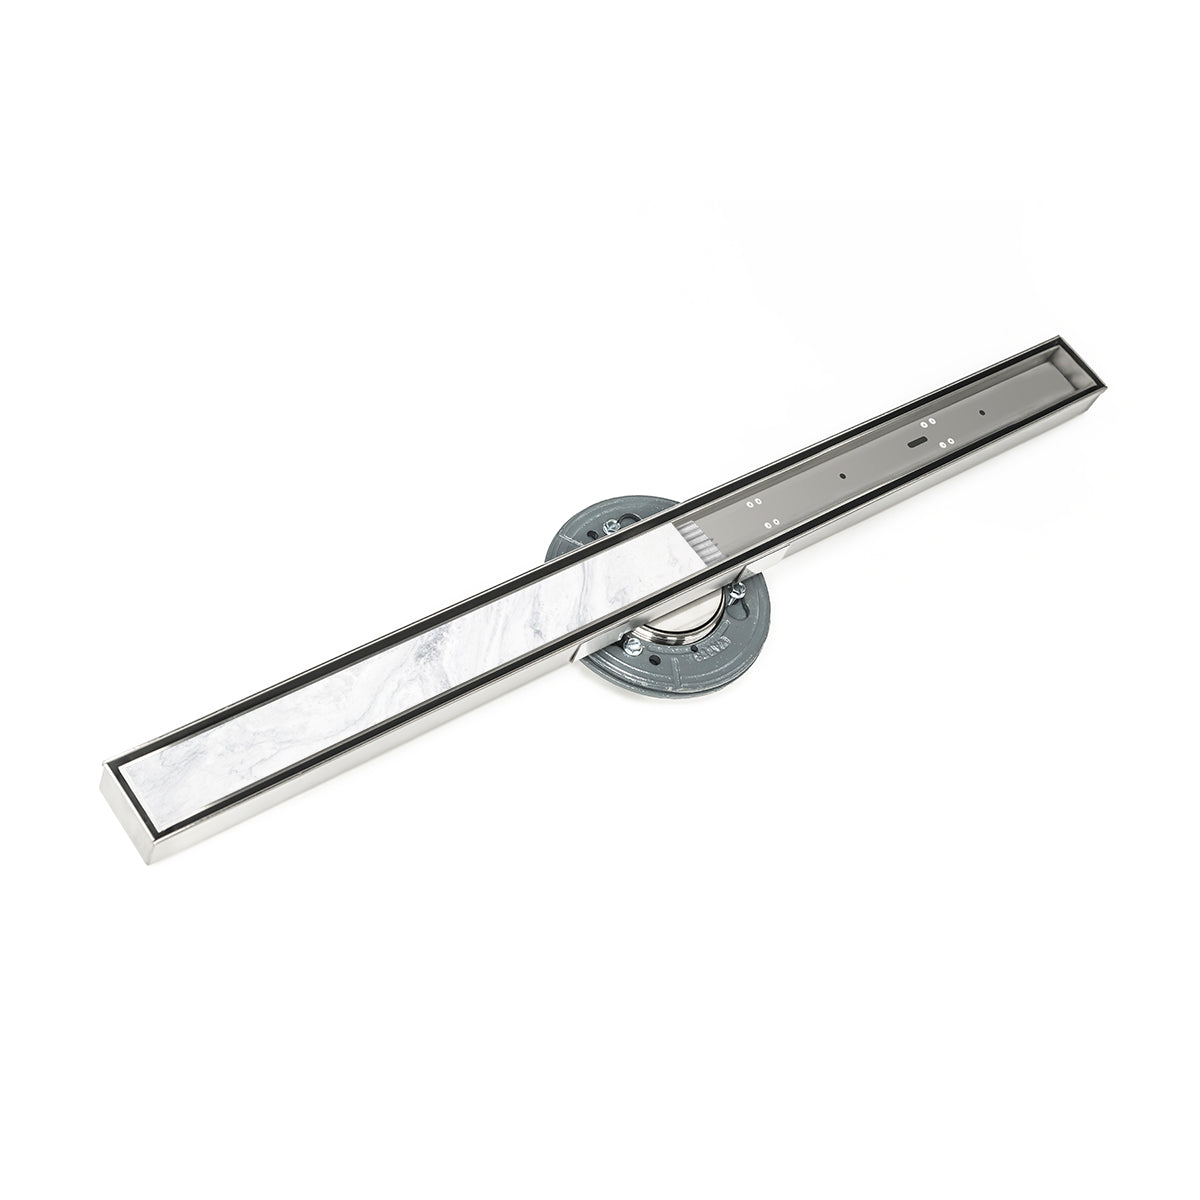 Infinity Drain 40" S-Stainless Steel Series High Flow Site Sizable Linear Drain Kit with Tile Insert Frame with Cast Iron Drain Body, 3" No Hub Outlet